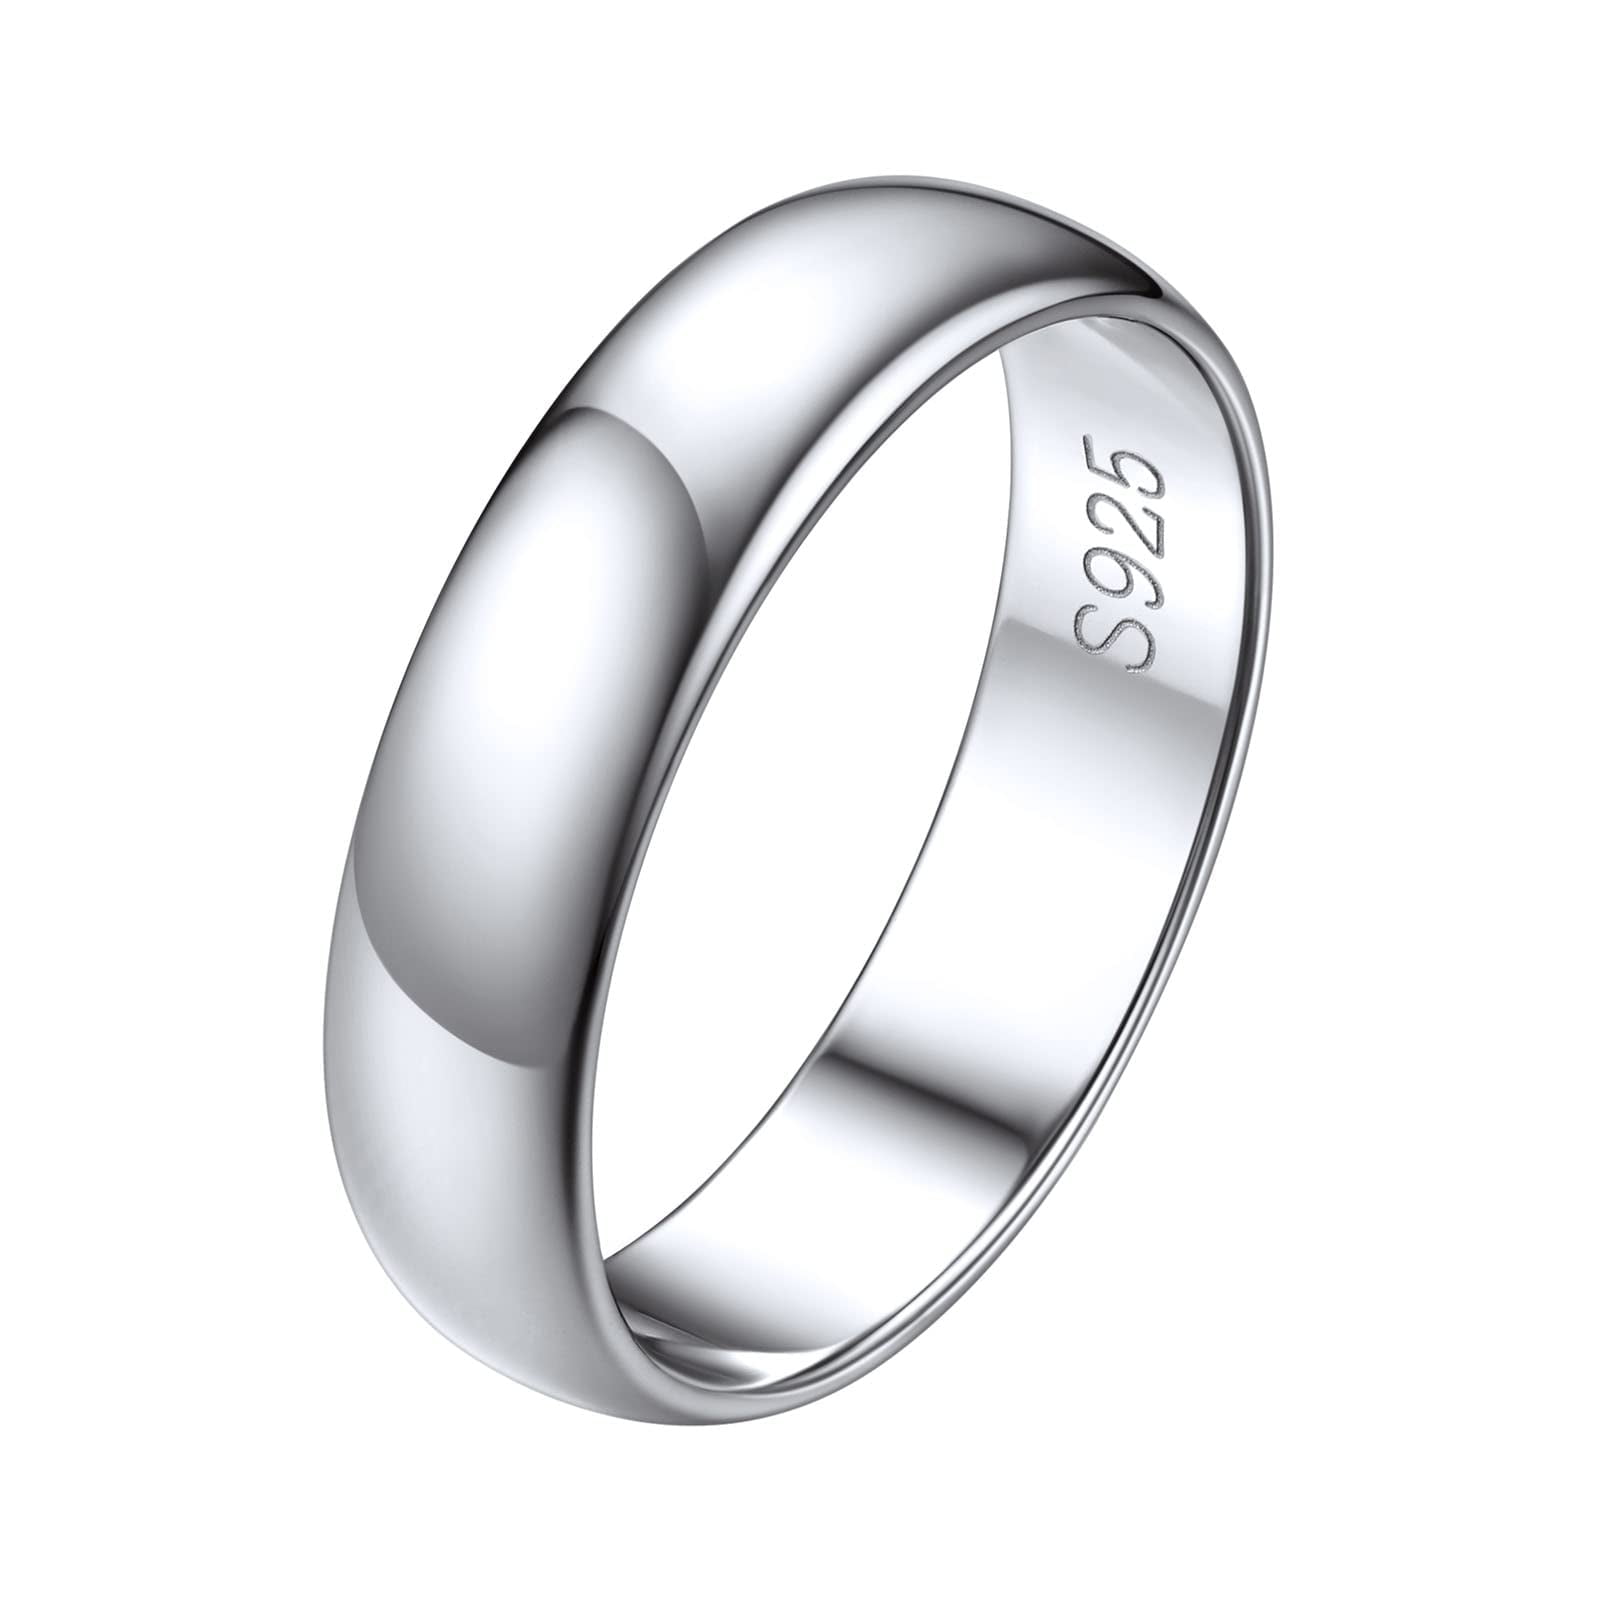 Buy Silver Chest 925 Pure Silver Ring for Men and Women | Adjustable Size  Finger Ring Band Jewellery for Women and Men – Hug Ring | Chandi Weight - 3  gm at Amazon.in